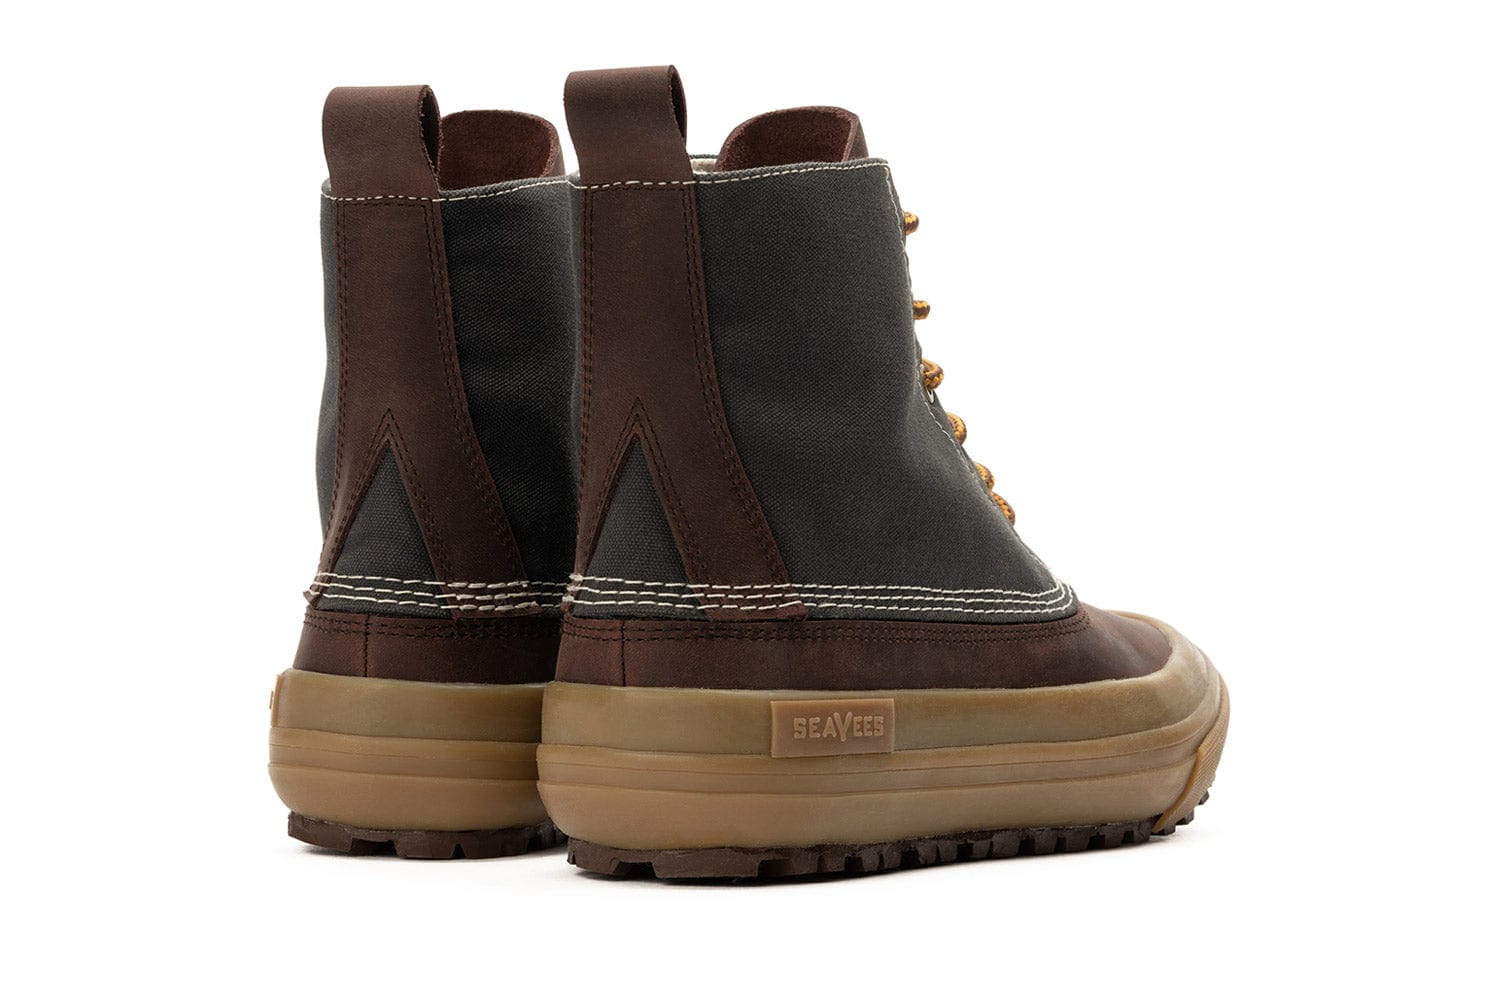 Back view of Hickory/Charcoal Cascade Range Boots highlighting the heel stitching and dual-tone high-top collar.